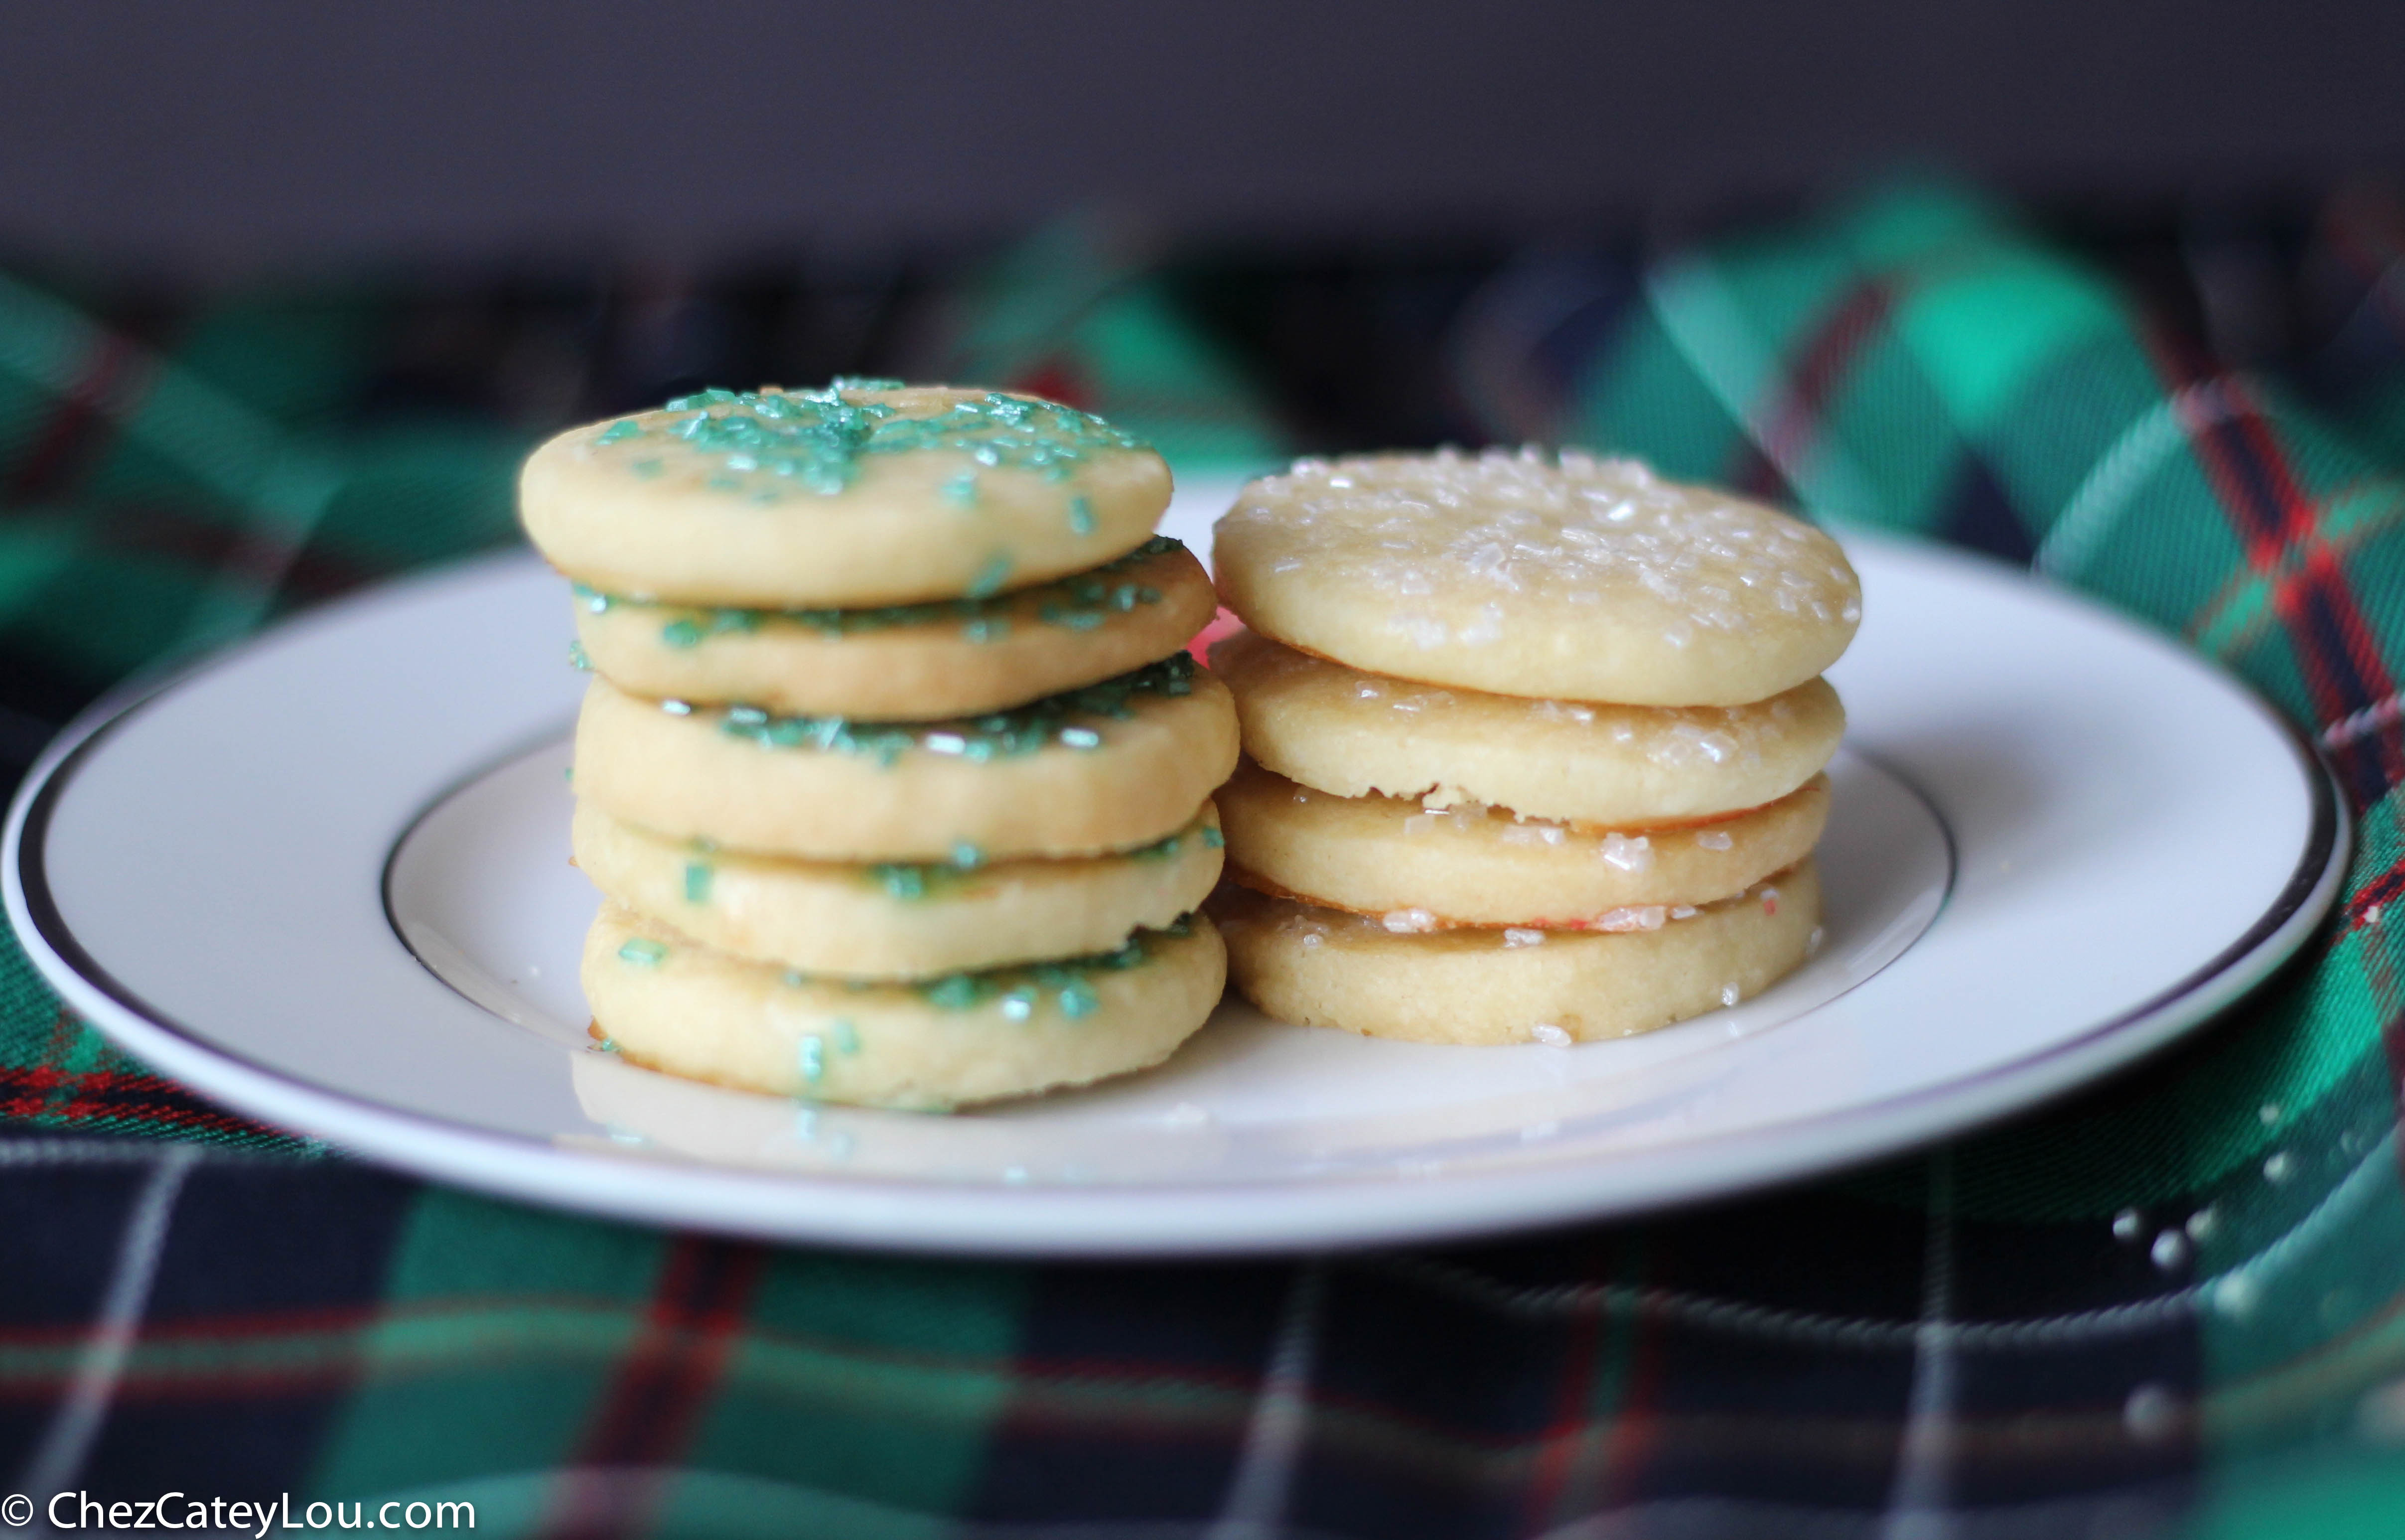 French Butter Cookies, also called a Sable | ChezCateyLou.com